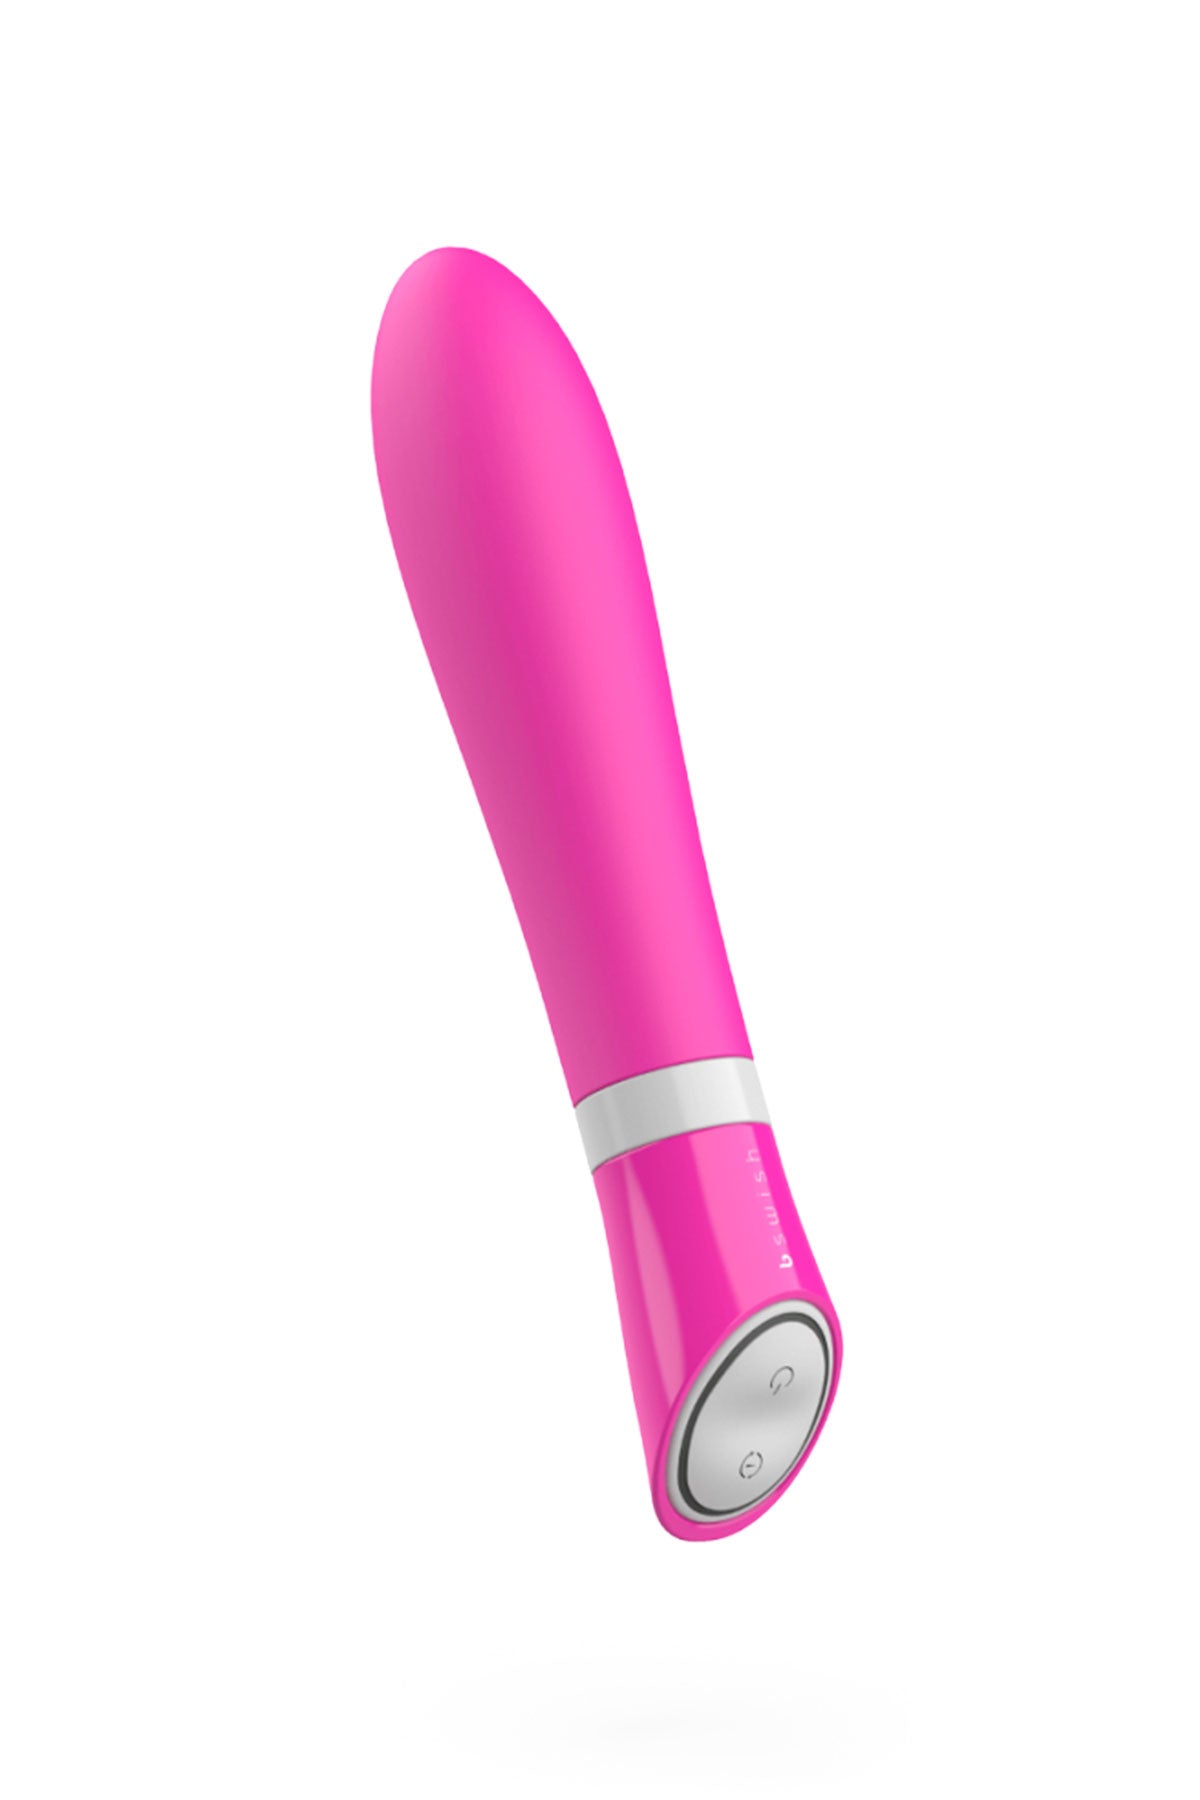 B-good Deluxe Vibrator by BSwish